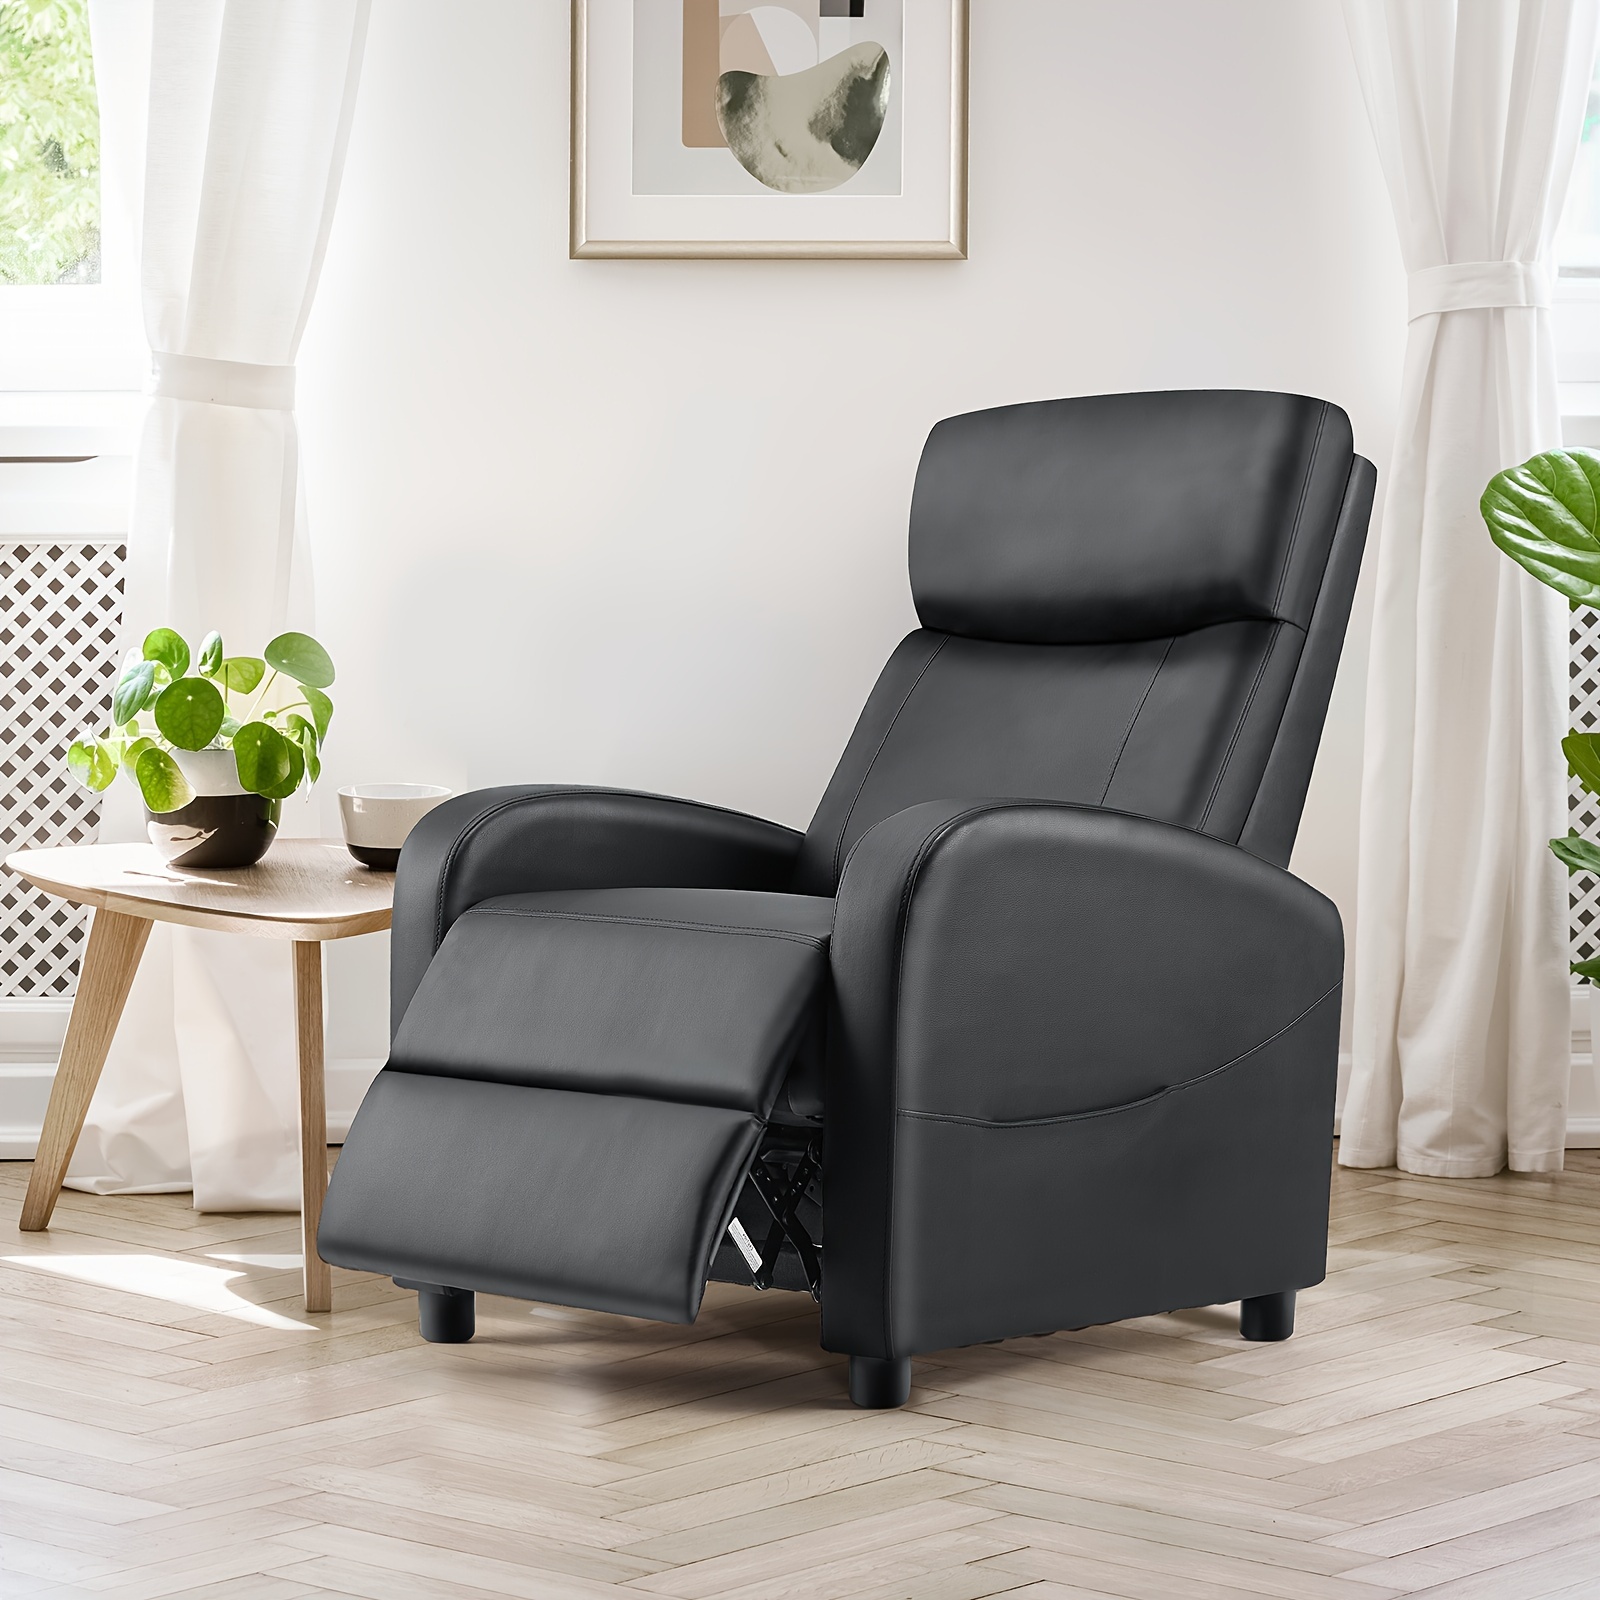 

Recliner Chair - Massage Reclining For Adults, Recliner Sofa, Comfortable Pu Leather, Padded Seat Backrest, Small Recliners For Living Room (black)